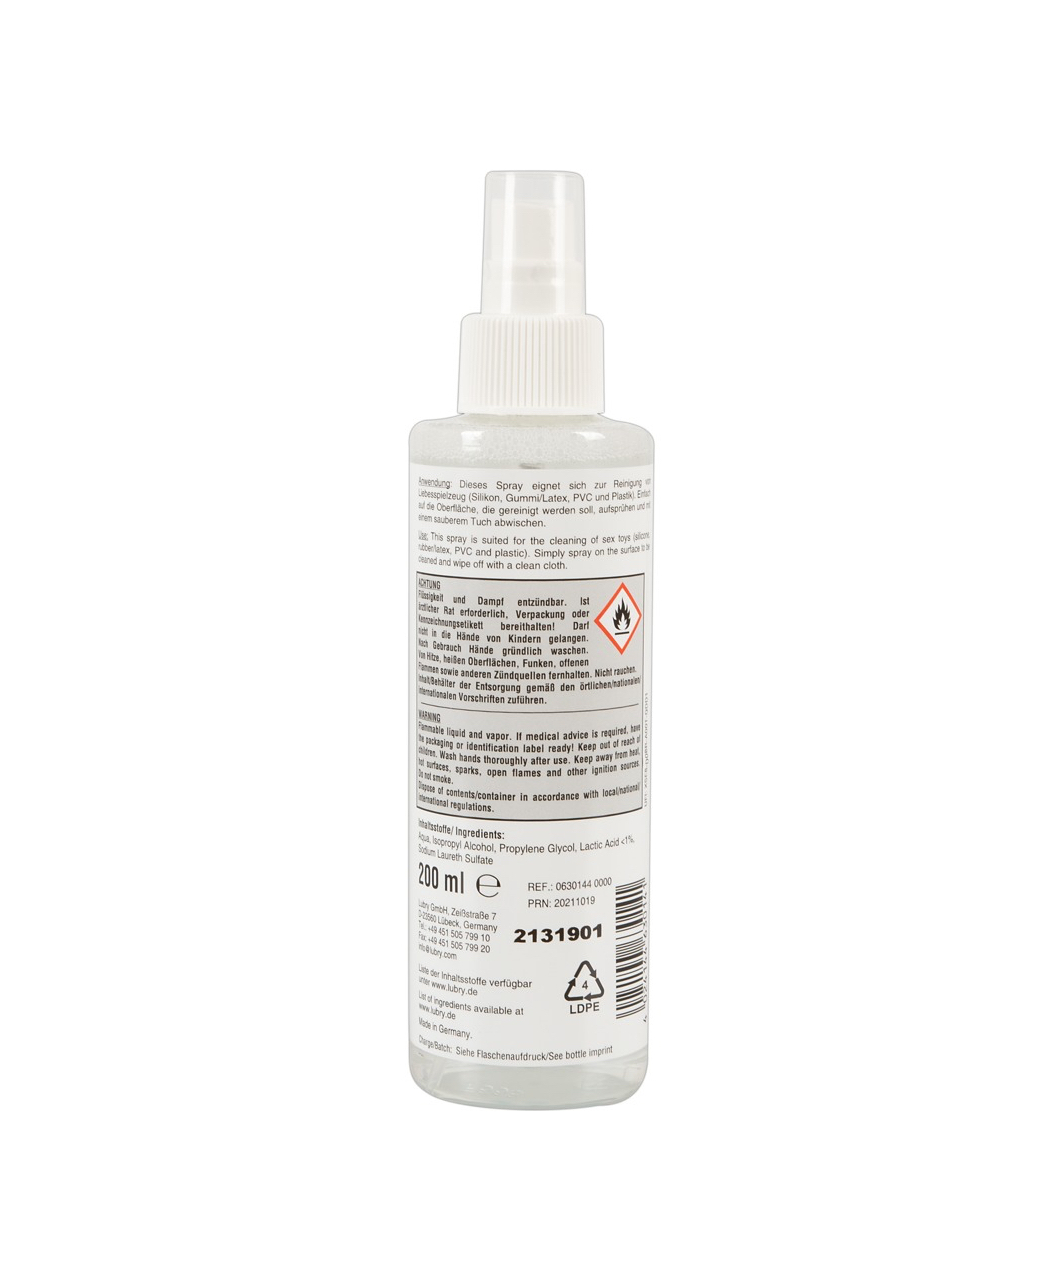 LUST sex toy disinfecting cleaner (50 / 200 ml)